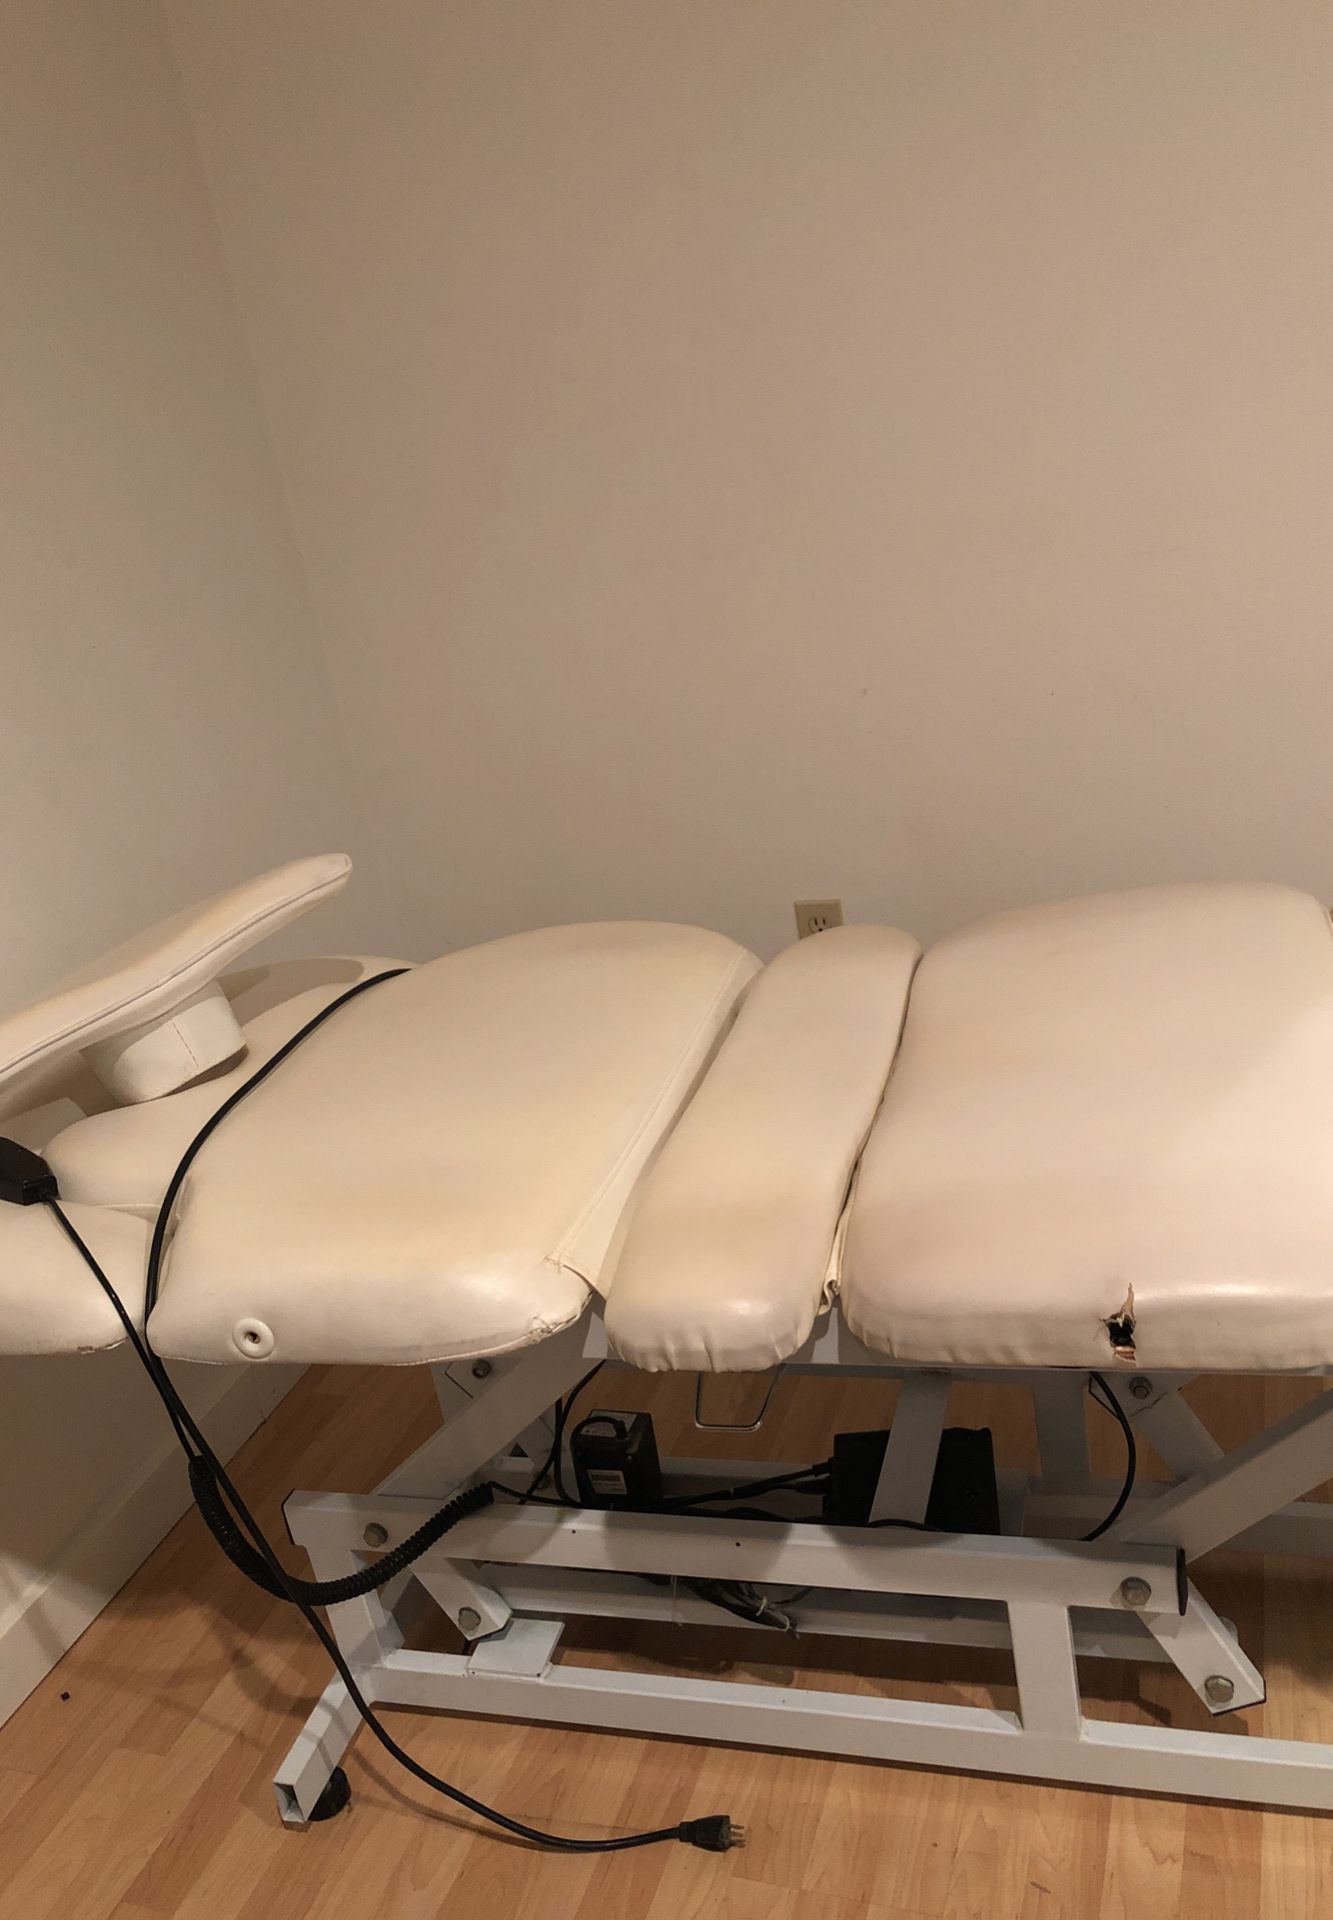 Used Medical aesthetic treatment bed-MUST PICK UP BY FRIDAY1/3